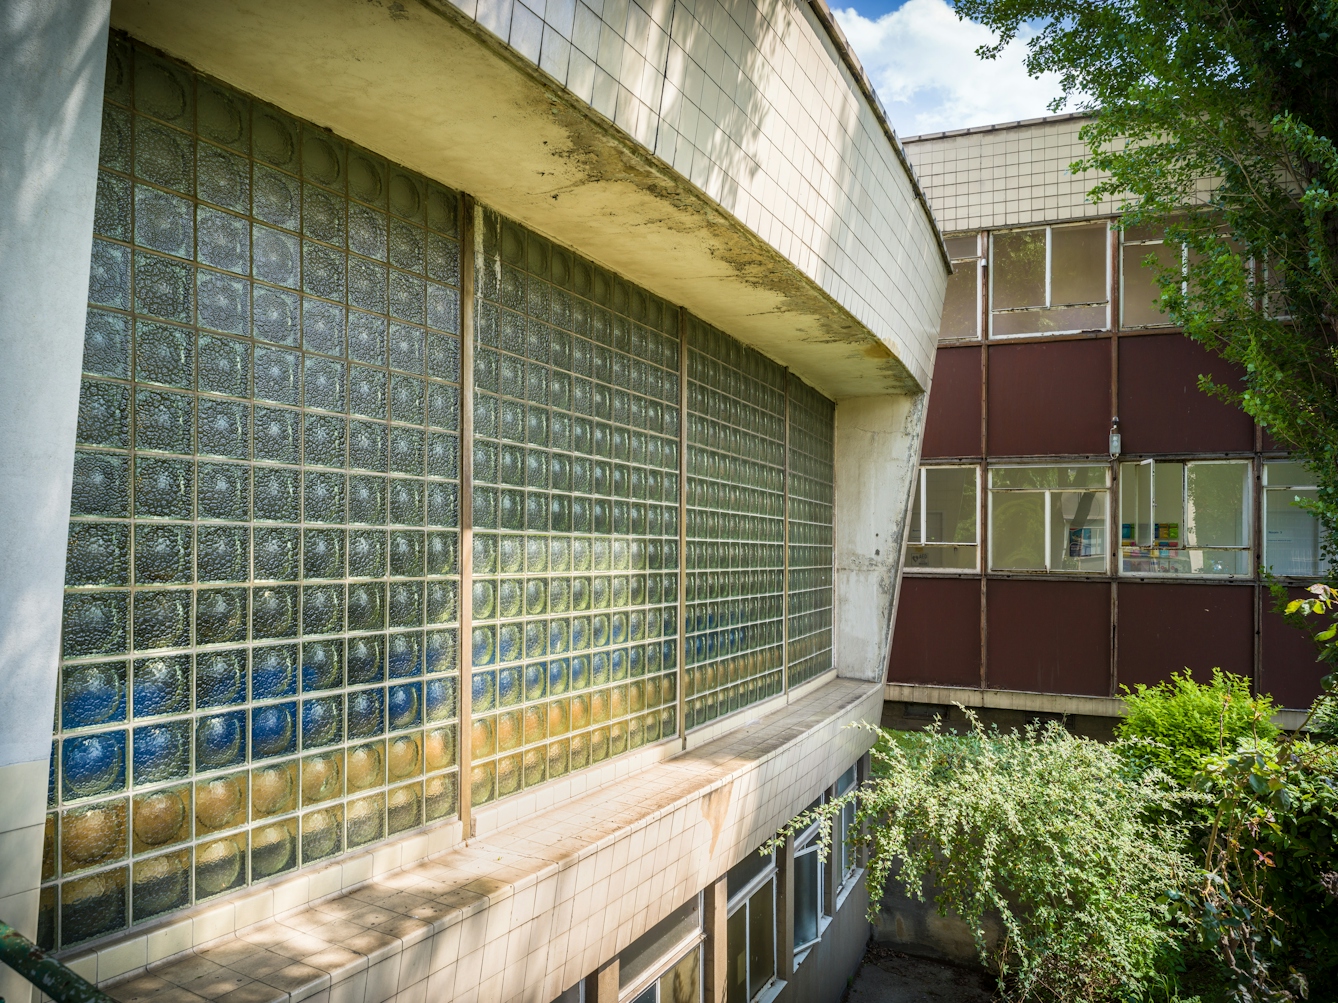 Photograph of a section of the front of the Finsbury Health Centre building showing the glass feature wall.